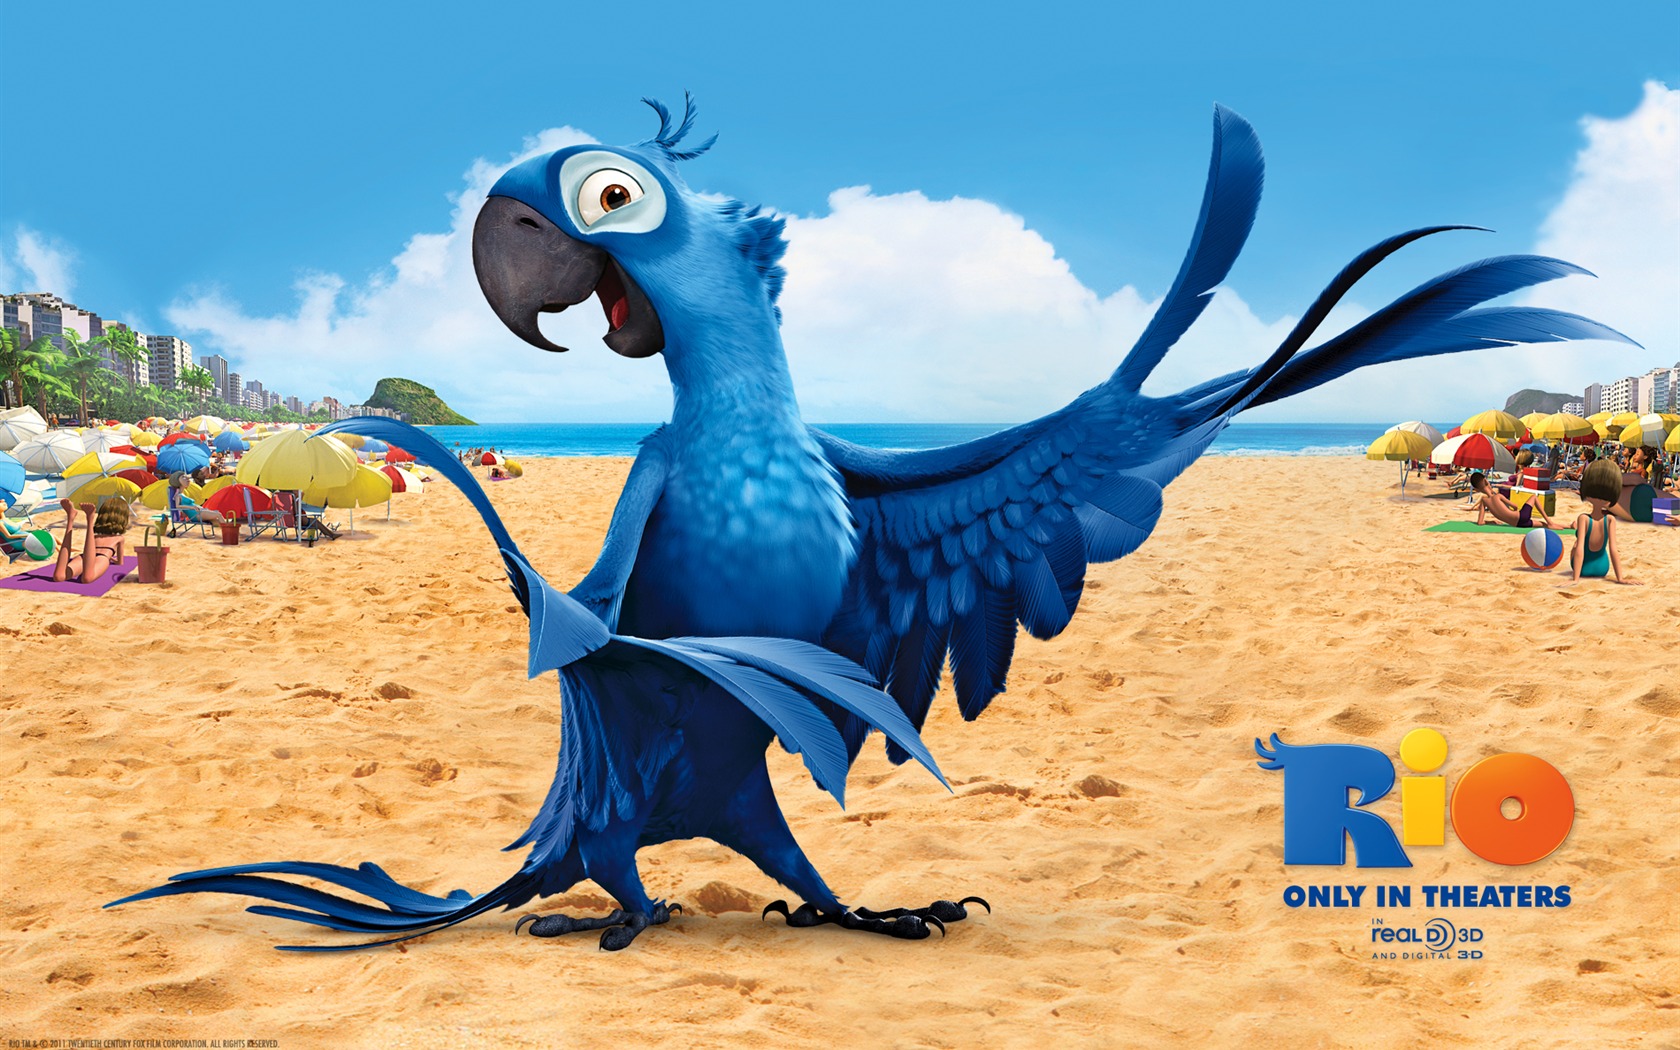 Rio 2011 wallpapers #2 - 1680x1050